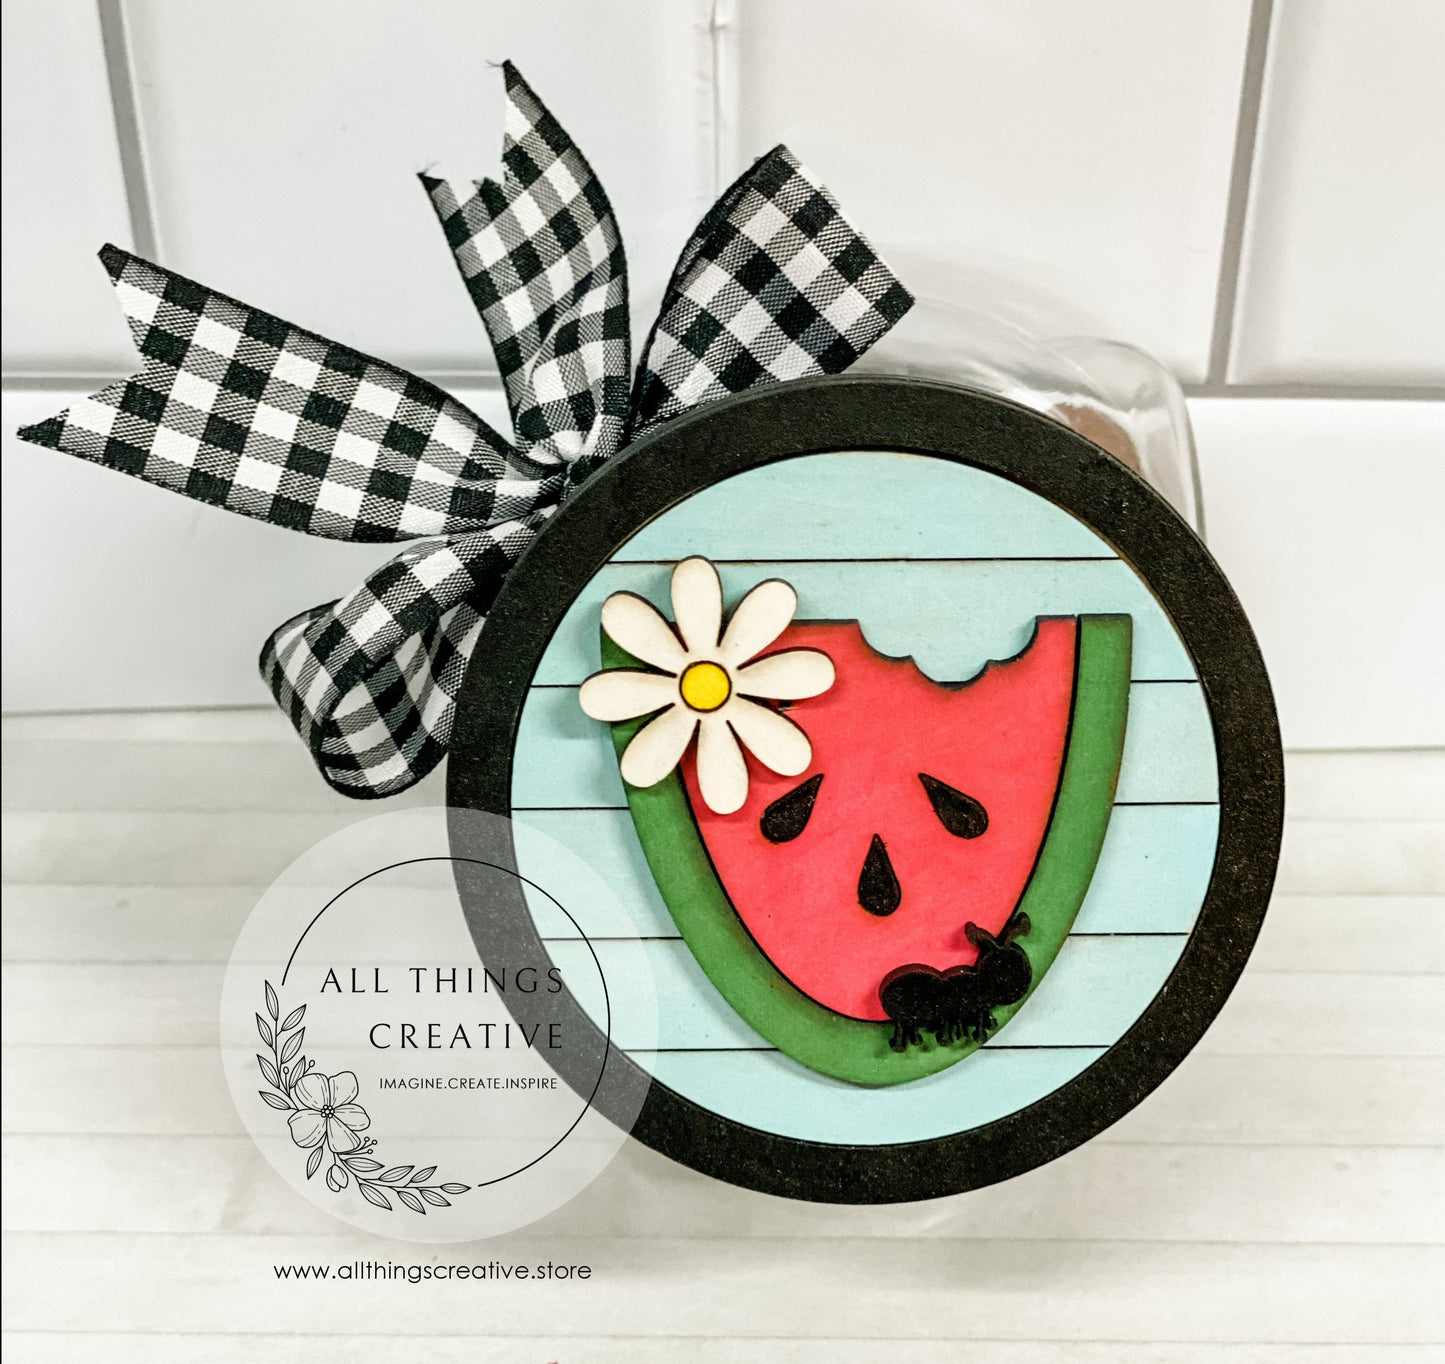 Glass Candy Jar Container with Removable Lid and a 3 inch Watermelon Interchangeable Circle Insert.